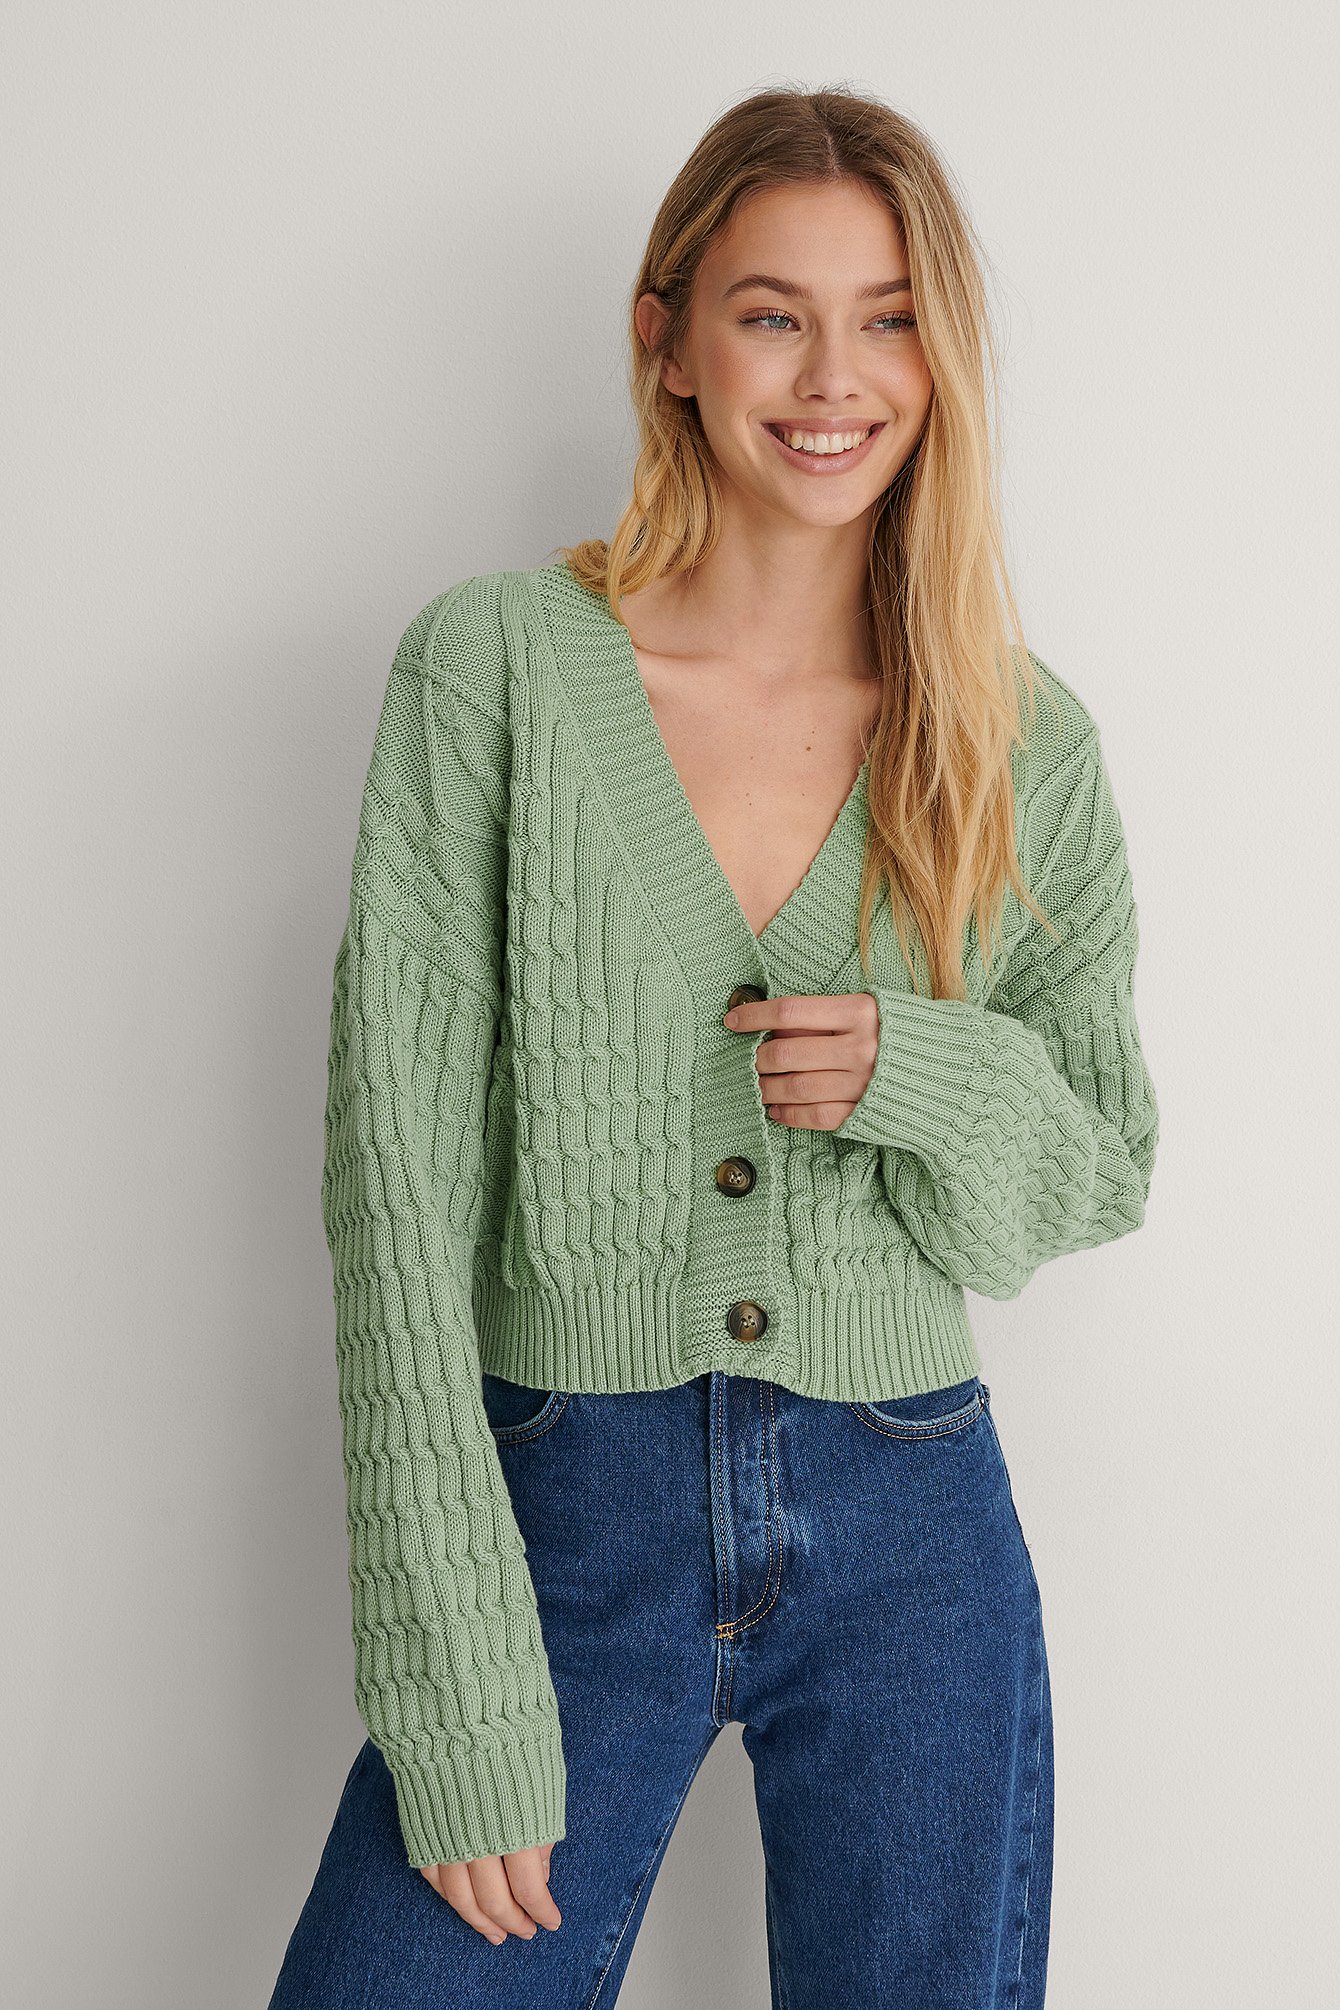 Mint Cable Knitted Cardigan